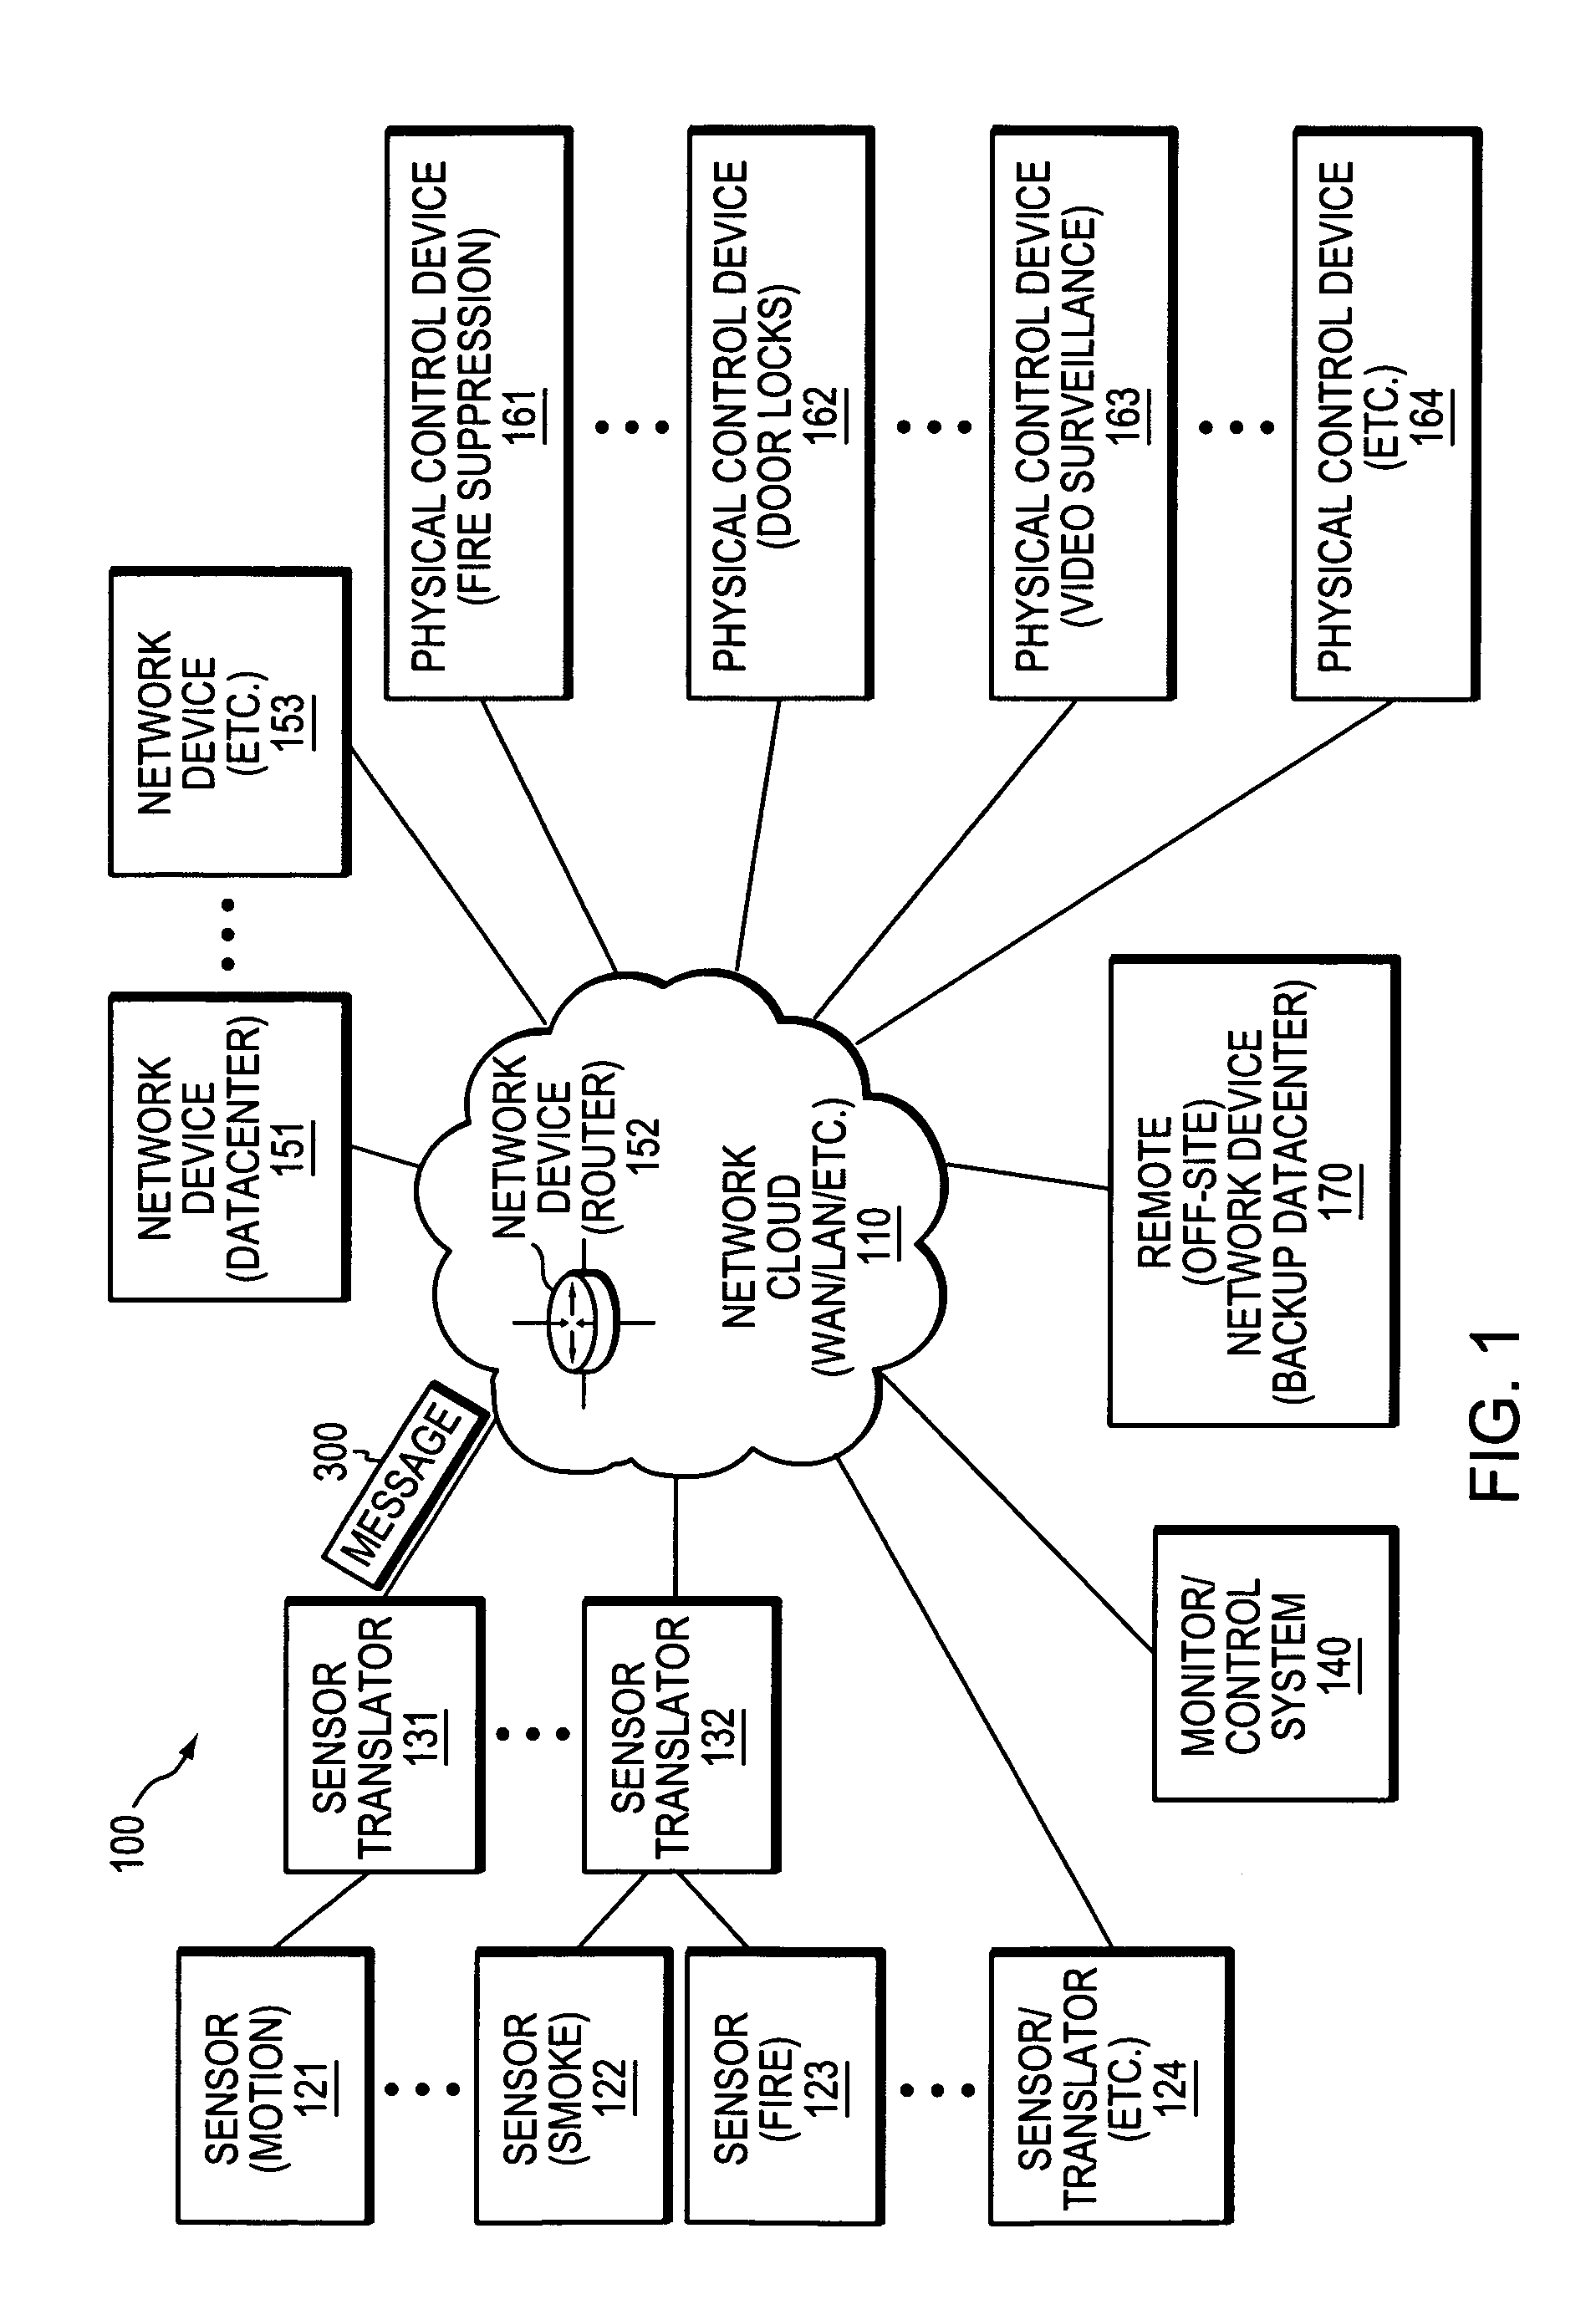 Dynamically responding to non-network events at a network device in a computer network